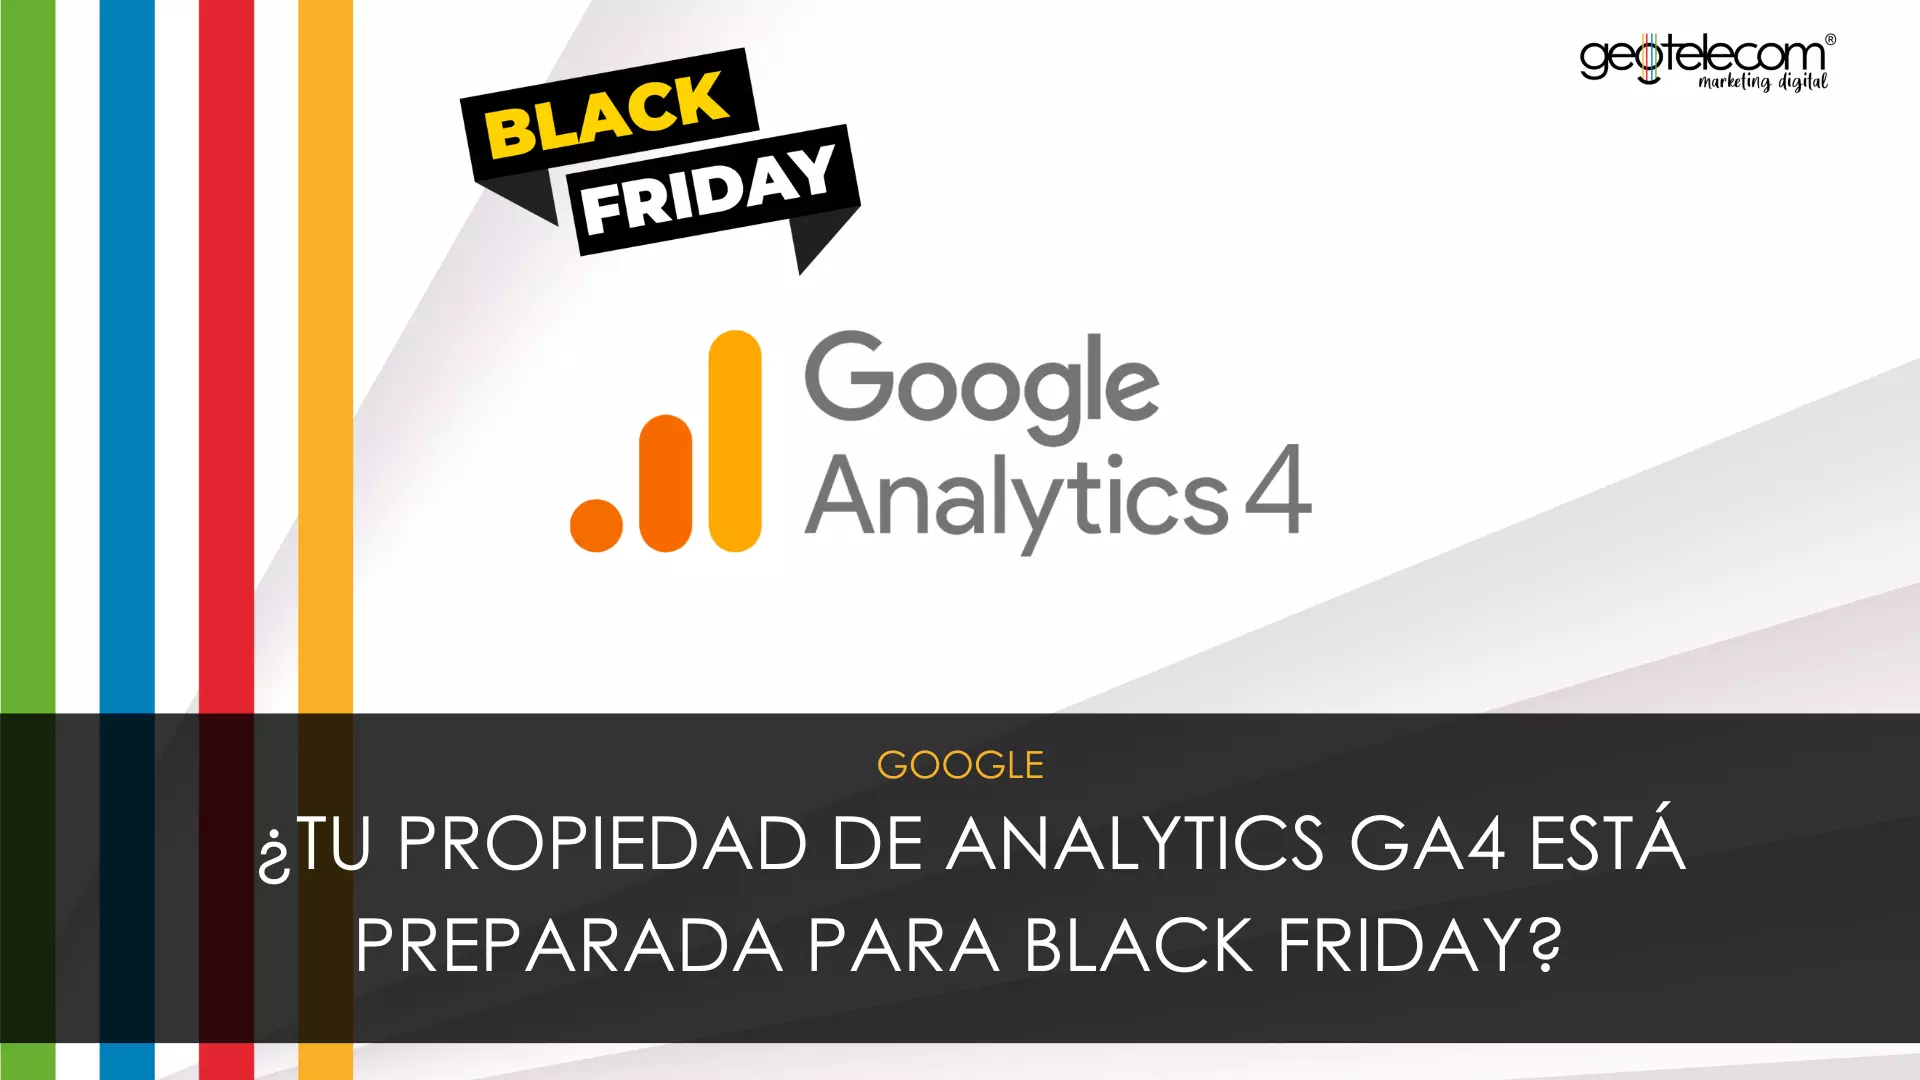 How to prepare your Google Analytics 4 property for this Black Friday